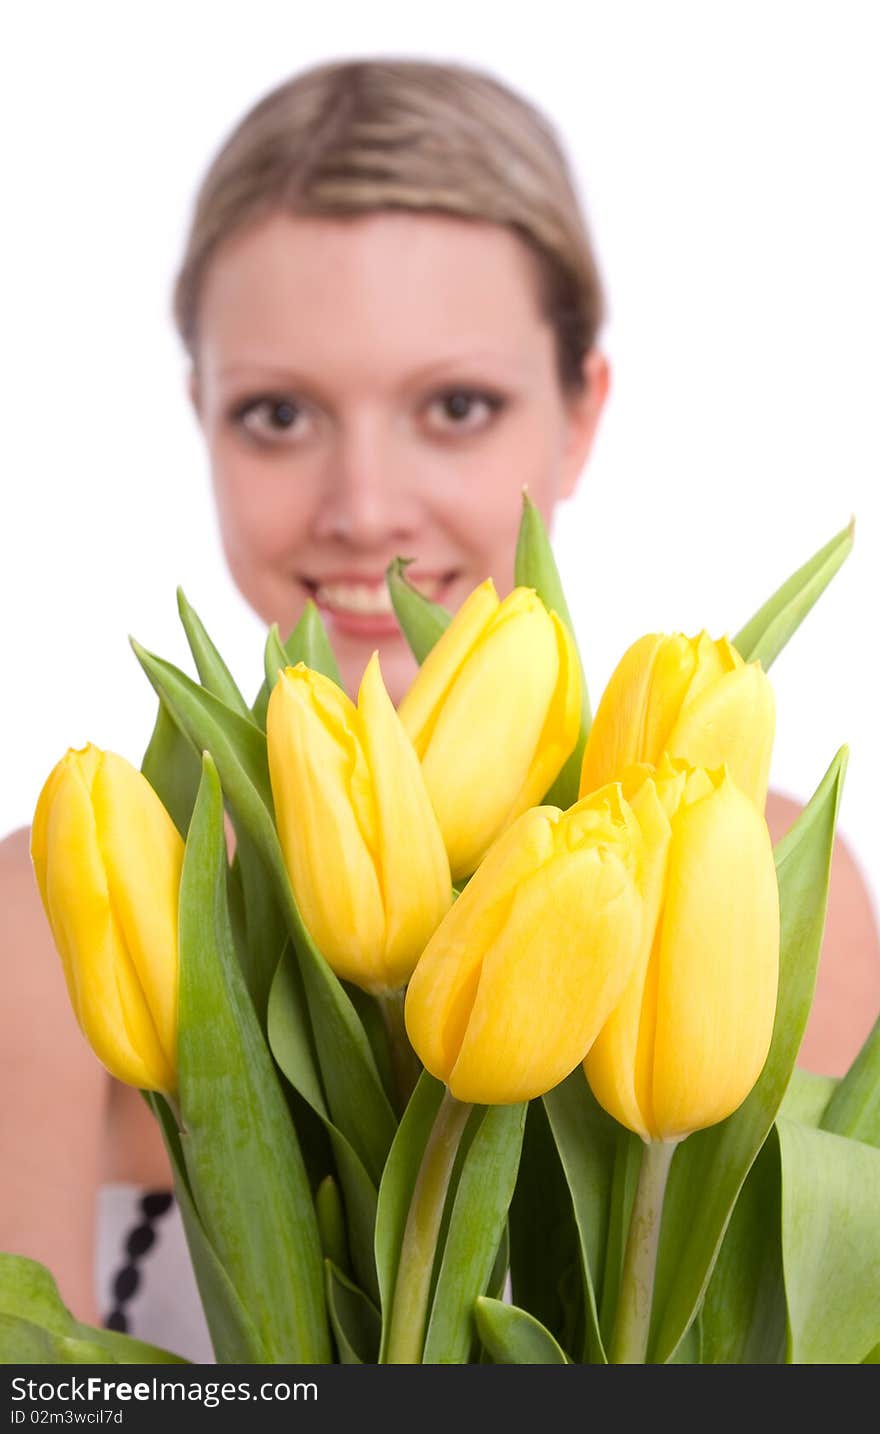 Woman with flowers.  Picture of happy blond with and yellow tulips.  Spring beauty. Pretty young female holding bouquet of tulips isolated on white background . Woman with flowers.  Picture of happy blond with and yellow tulips.  Spring beauty. Pretty young female holding bouquet of tulips isolated on white background .